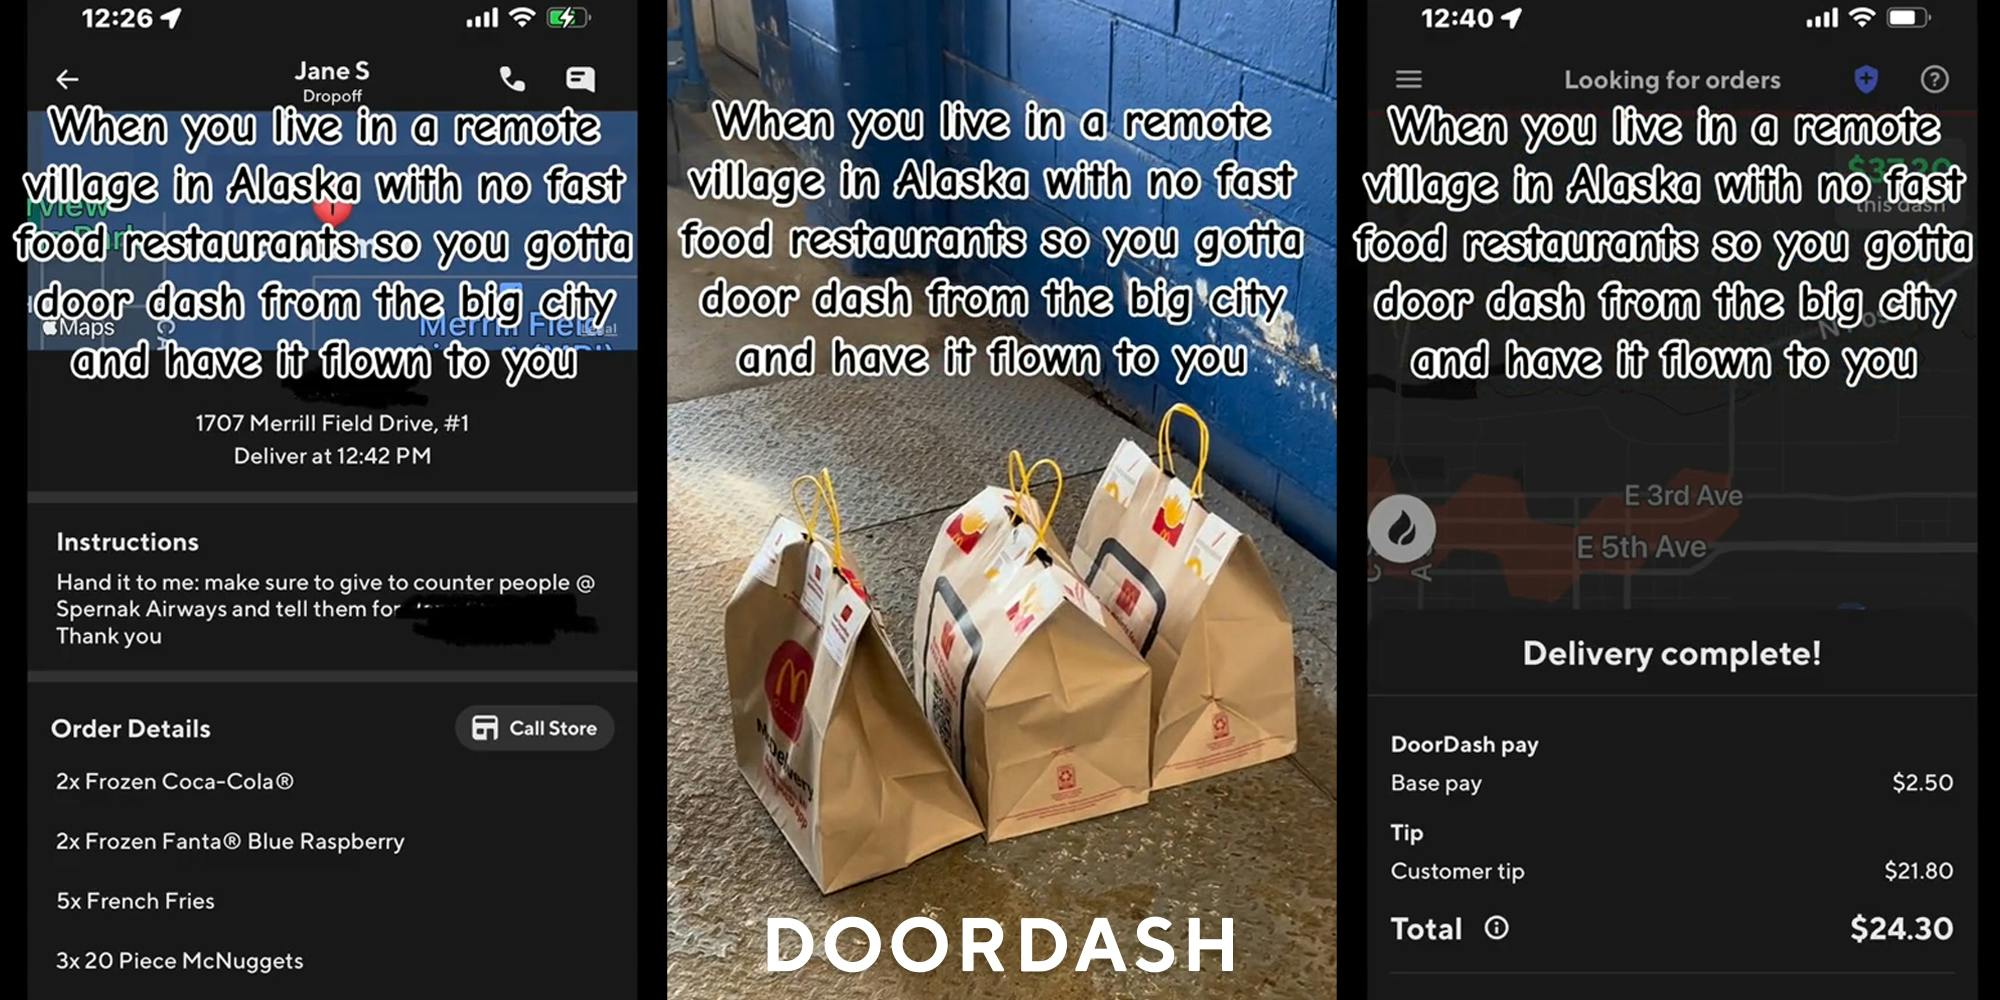 DoorDash order on screen with caption "When you live in a remote village in Alaska with no fast food restaurants so you gotta door dash from the big city and have it flown to you" (l) McDonald's bags DoorDash delivery with DoorDash logo at bottom with caption "When you live in a remote village in Alaska with no fast food restaurants so you gotta door dash from the big city and have it flown to you" (c) DoorDash order on screen with caption "When you live in a remote village in Alaska with no fast food restaurants so you gotta door dash from the big city and have it flown to you" (r)